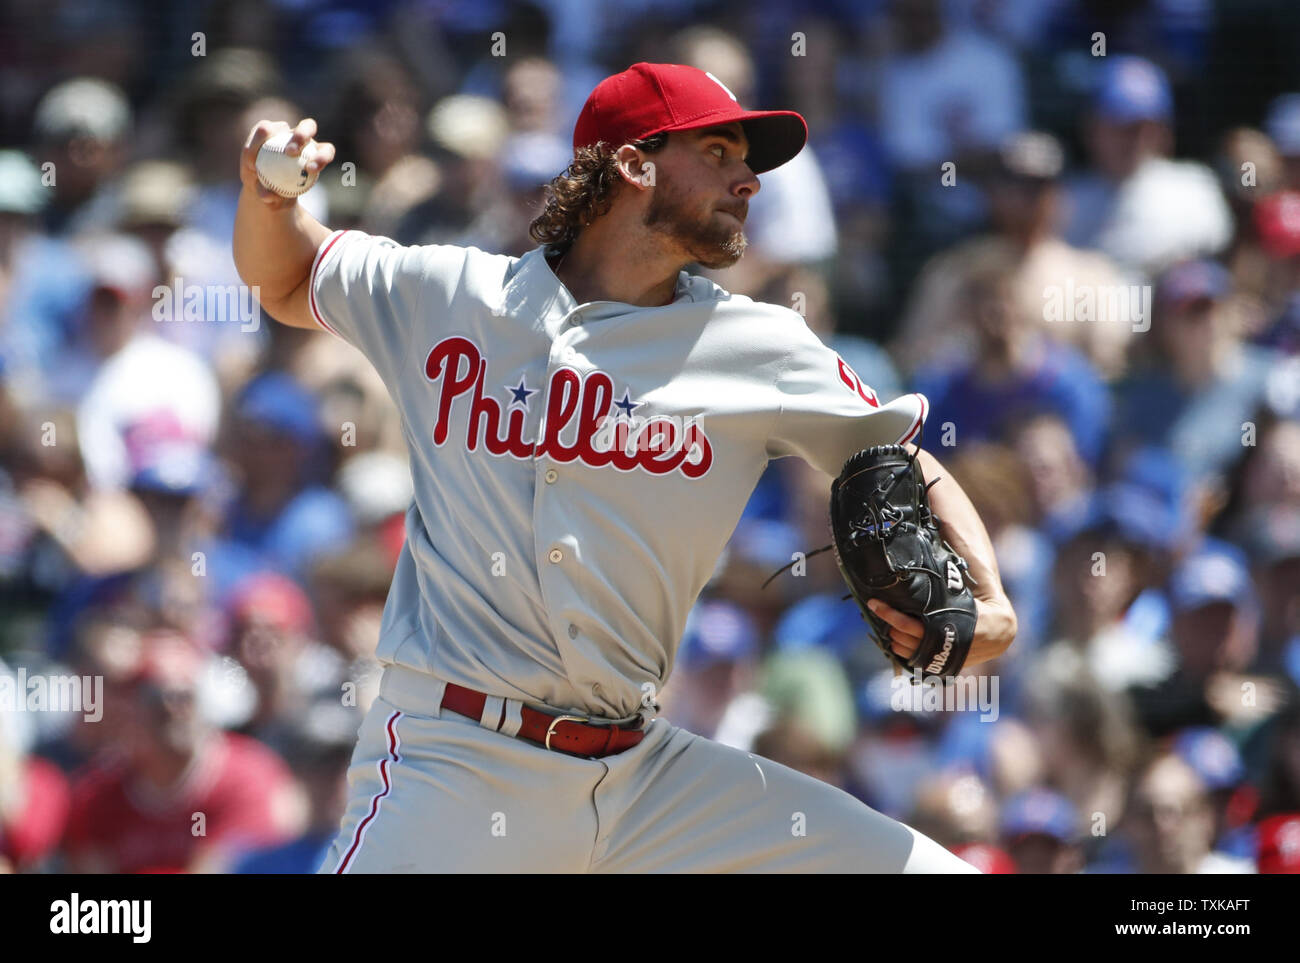 Philadelphia Phillies starting pitcher Aaron Nola delivers against the Chicago Cubs in the second inning at Wrigley Field on May 23, 2019 in Chicago. Photo by Kamil Krzaczynski/UPI Stock Photo